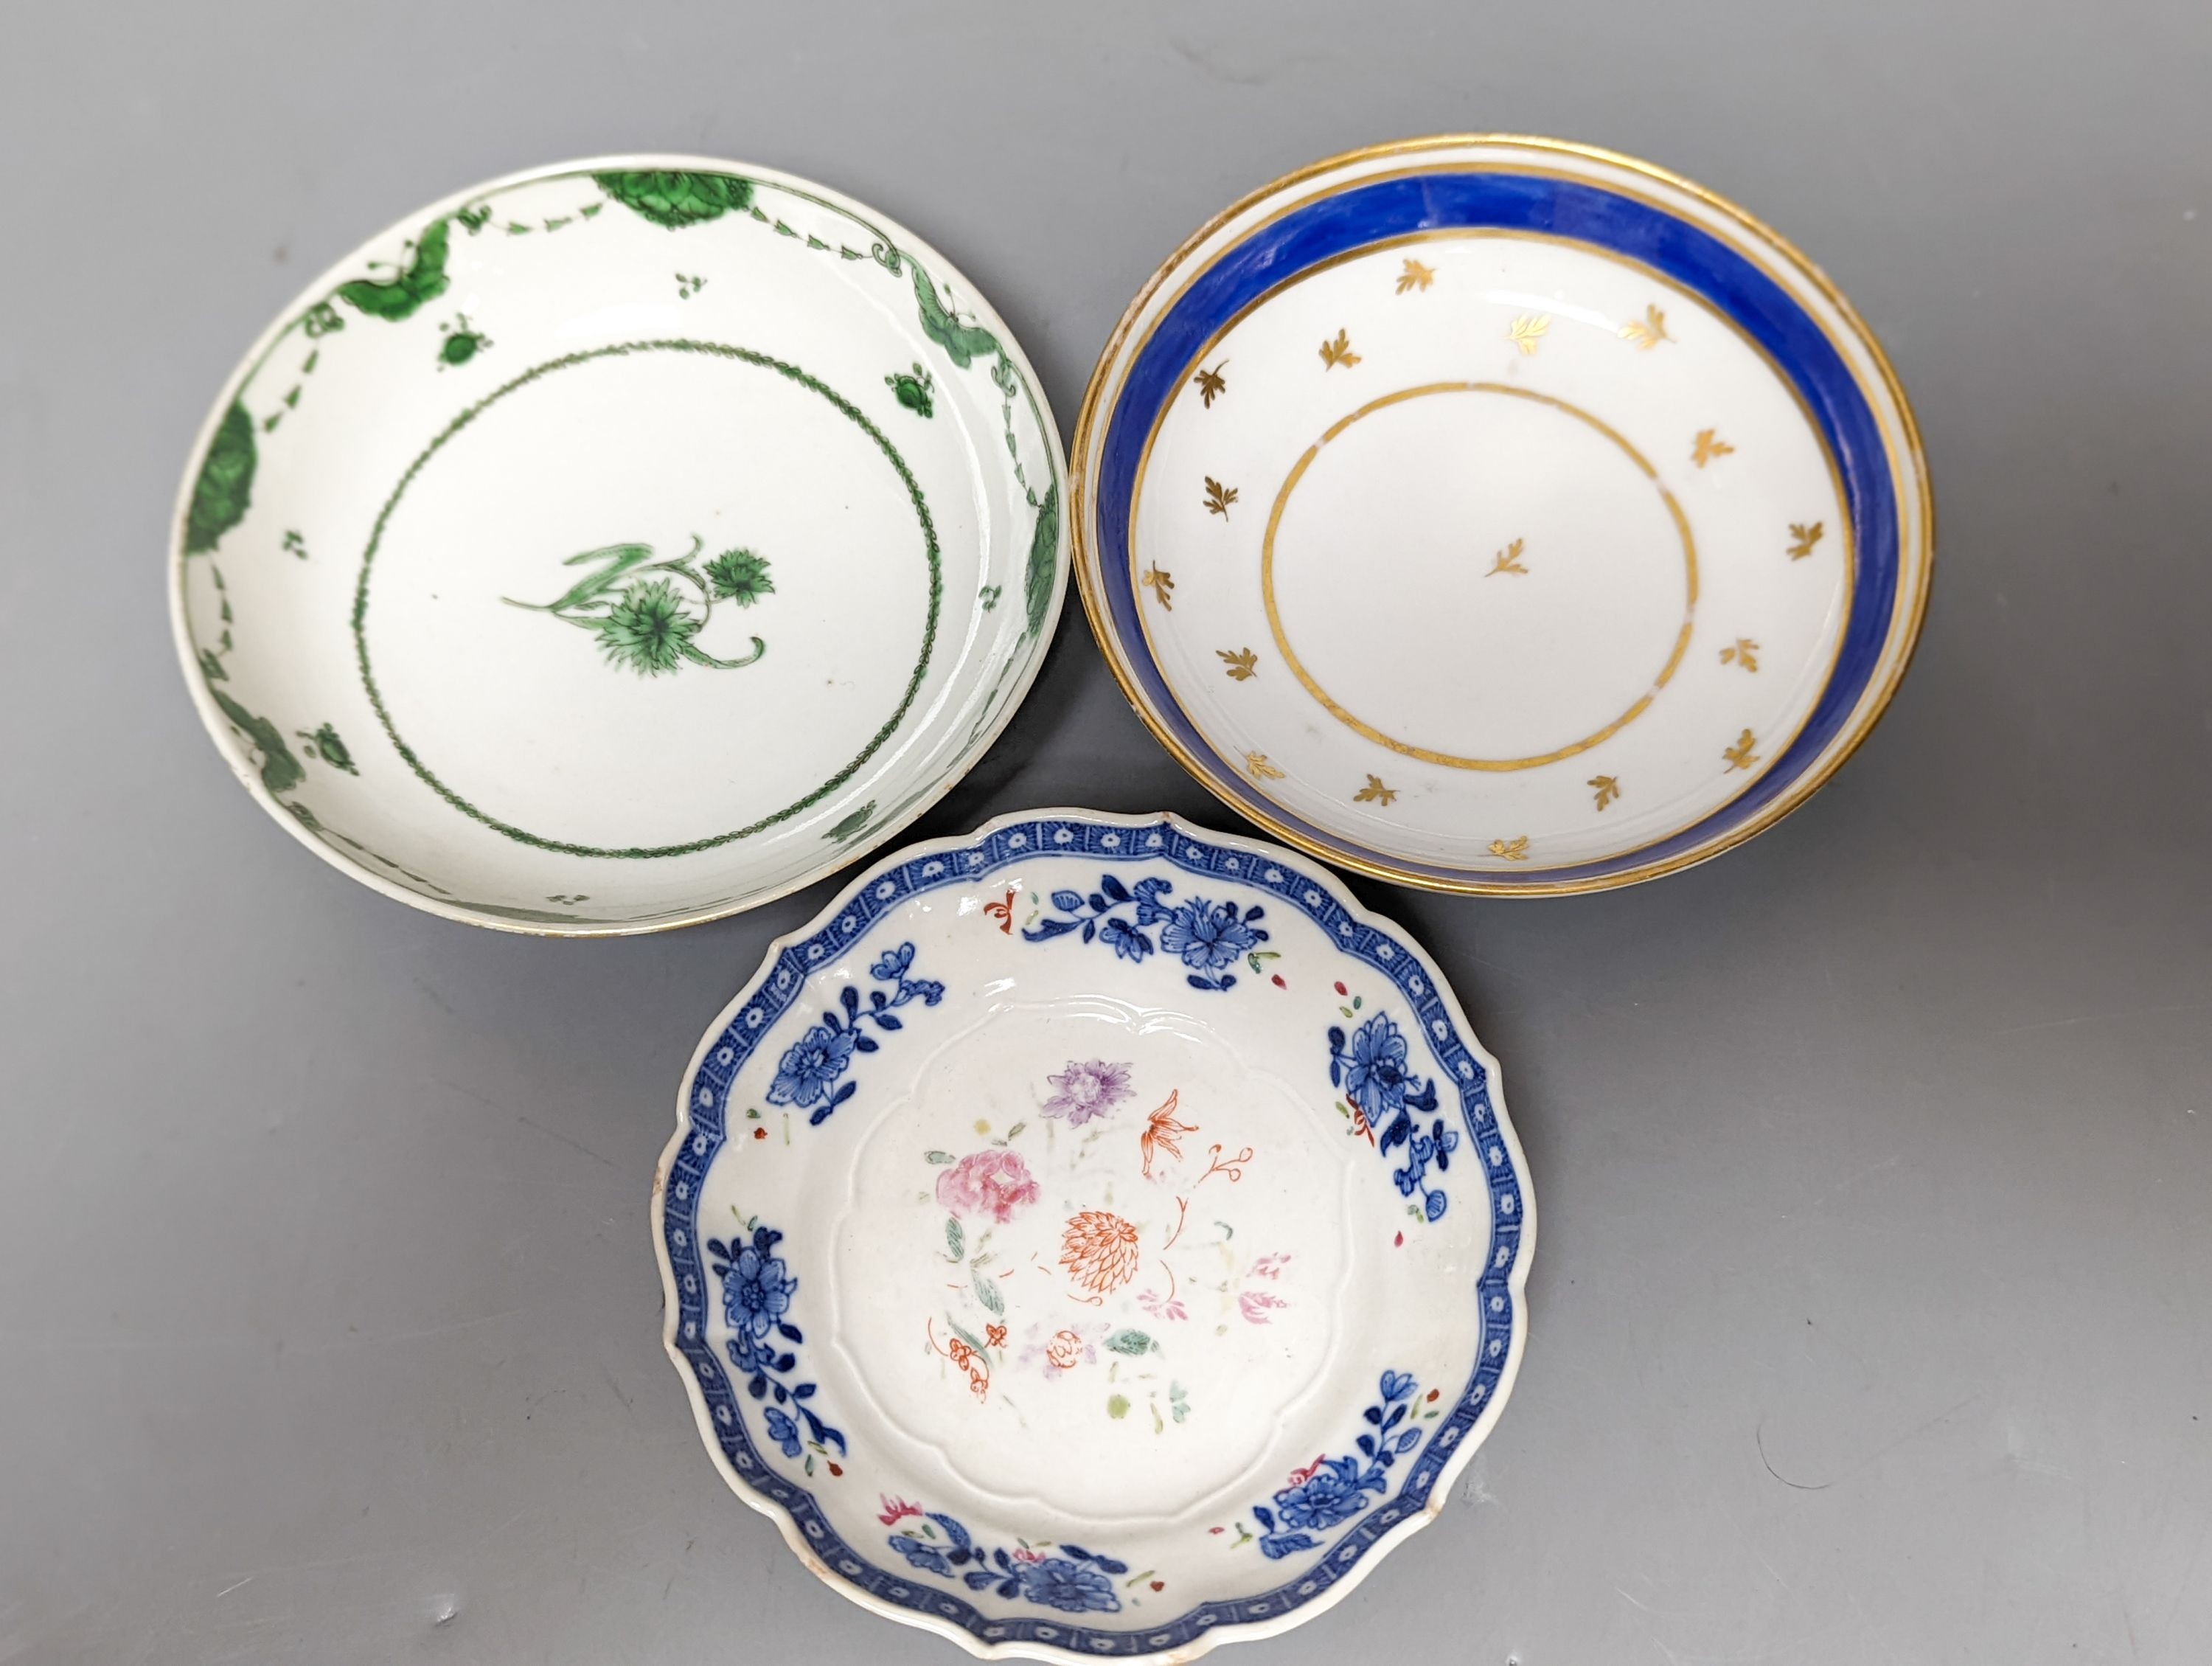 Two 18th century Chinese tea bowls, a 19th century German coffee can and saucer, a Spode coffee can and another